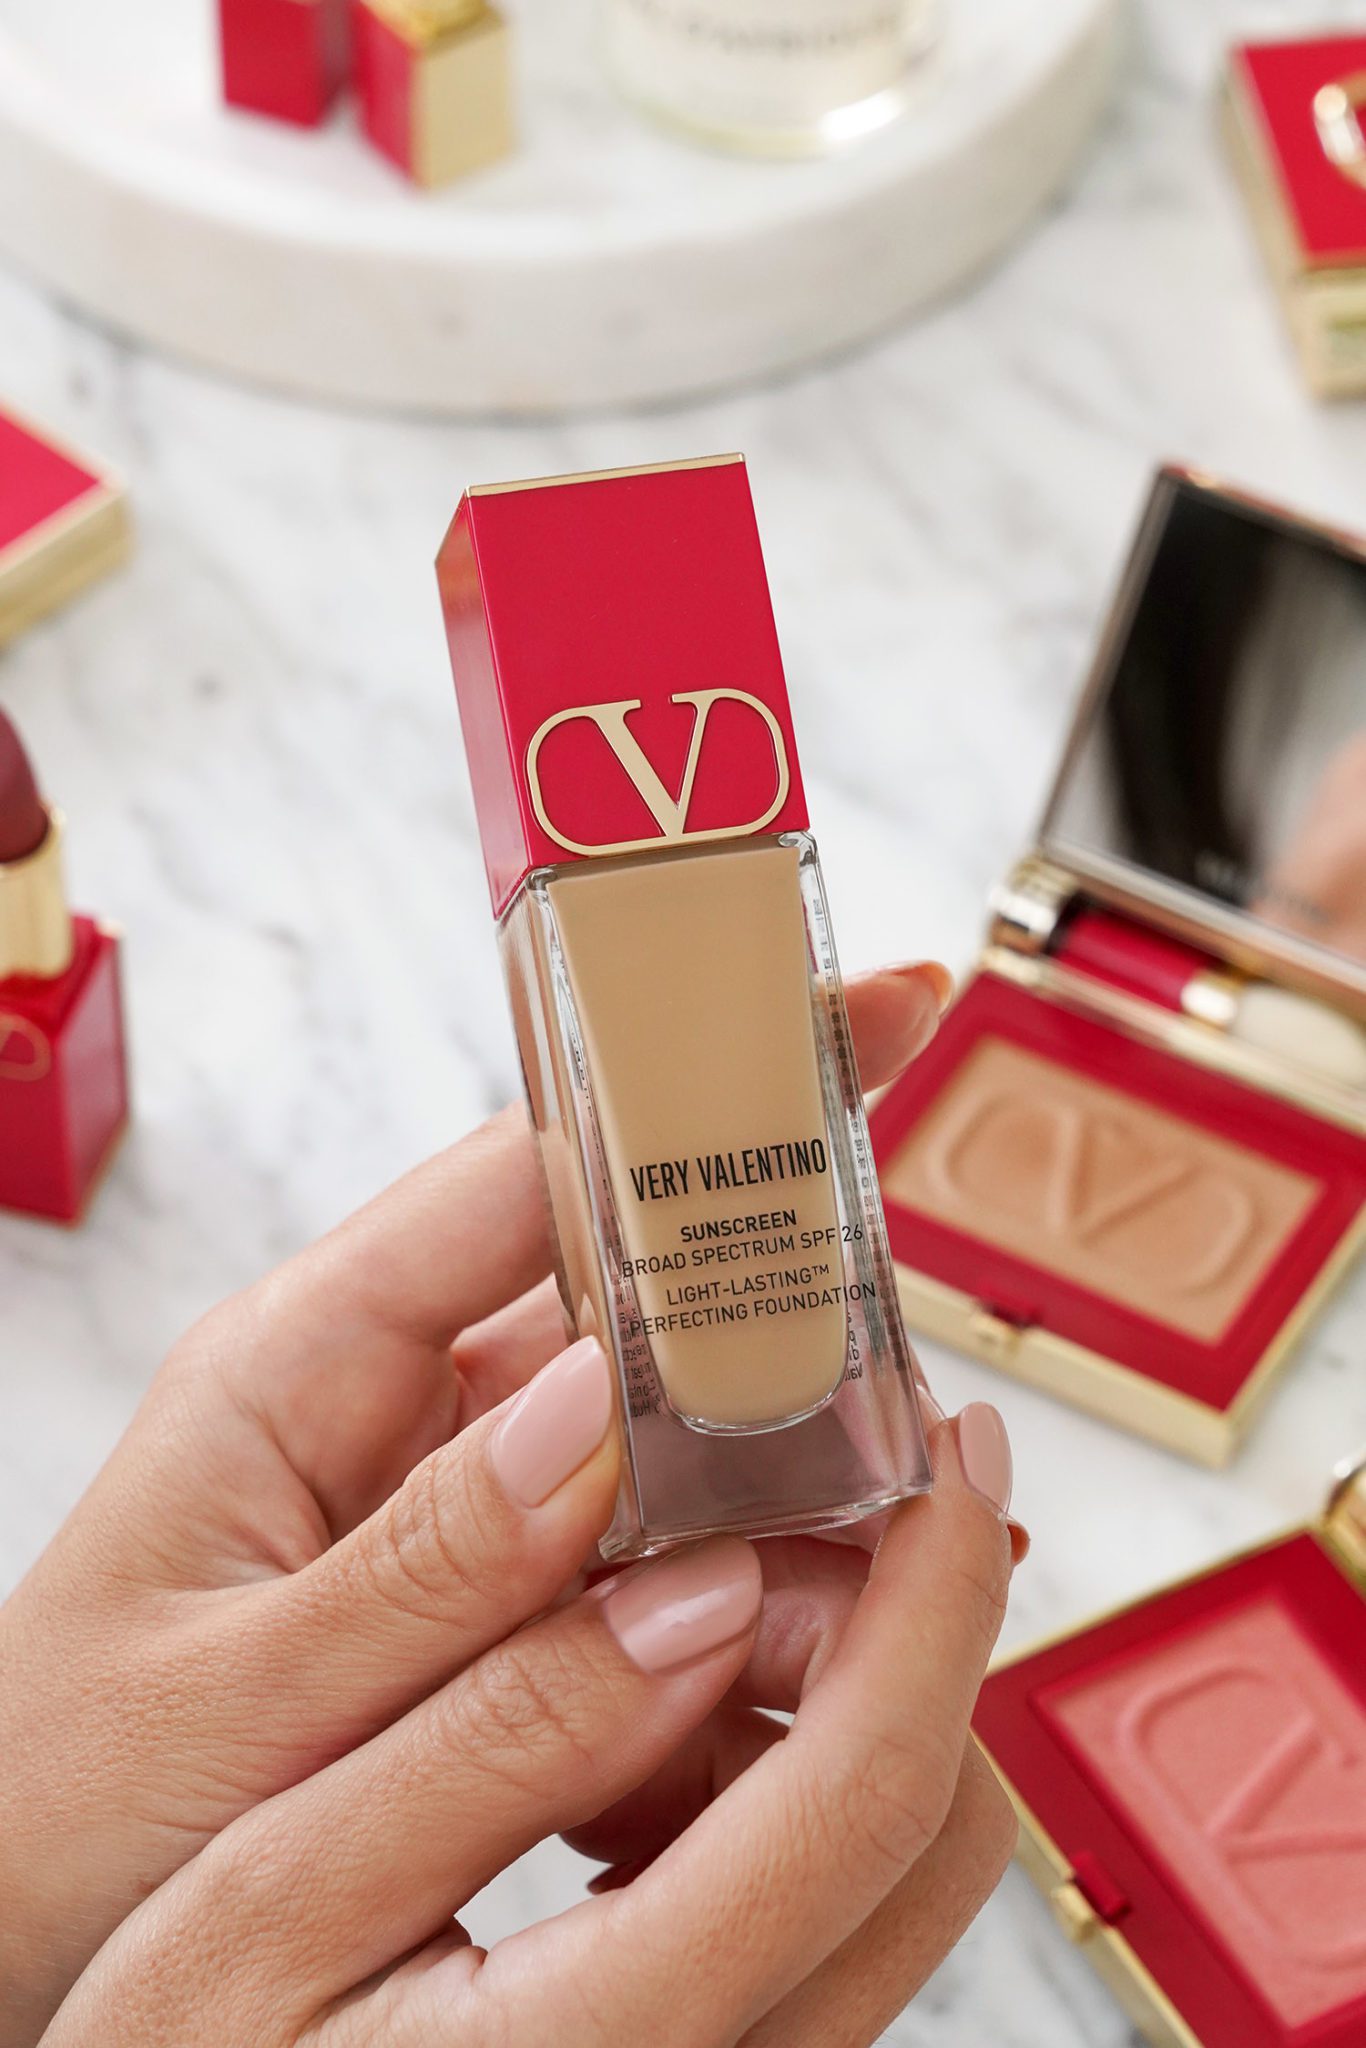 Valentino Beauty Haul From Nordstrom The Beauty Look Book 4581